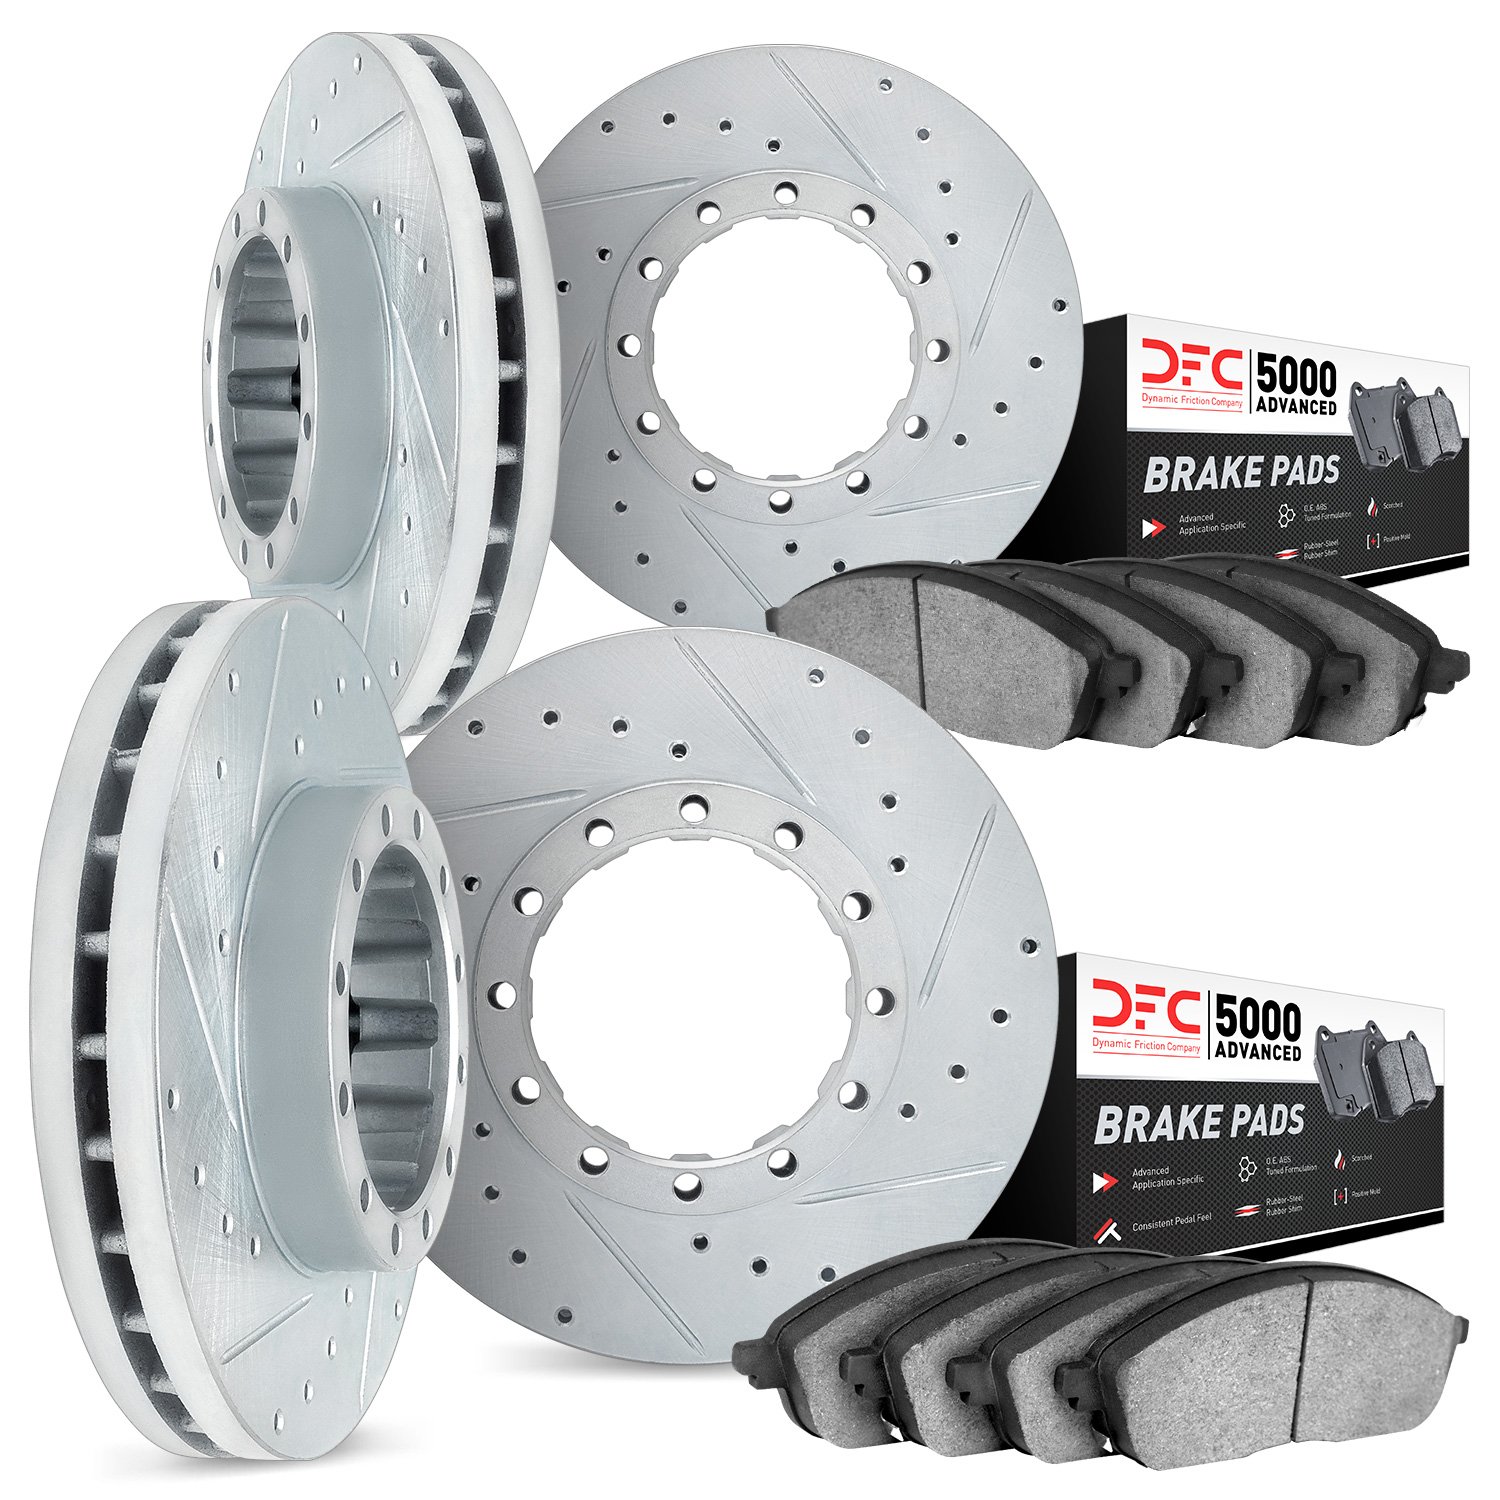 7504-72057 Drilled/Slotted Brake Rotors w/5000 Advanced Brake Pads Kit [Silver], 2012-2020 Freightliner, Position: Front and Rea